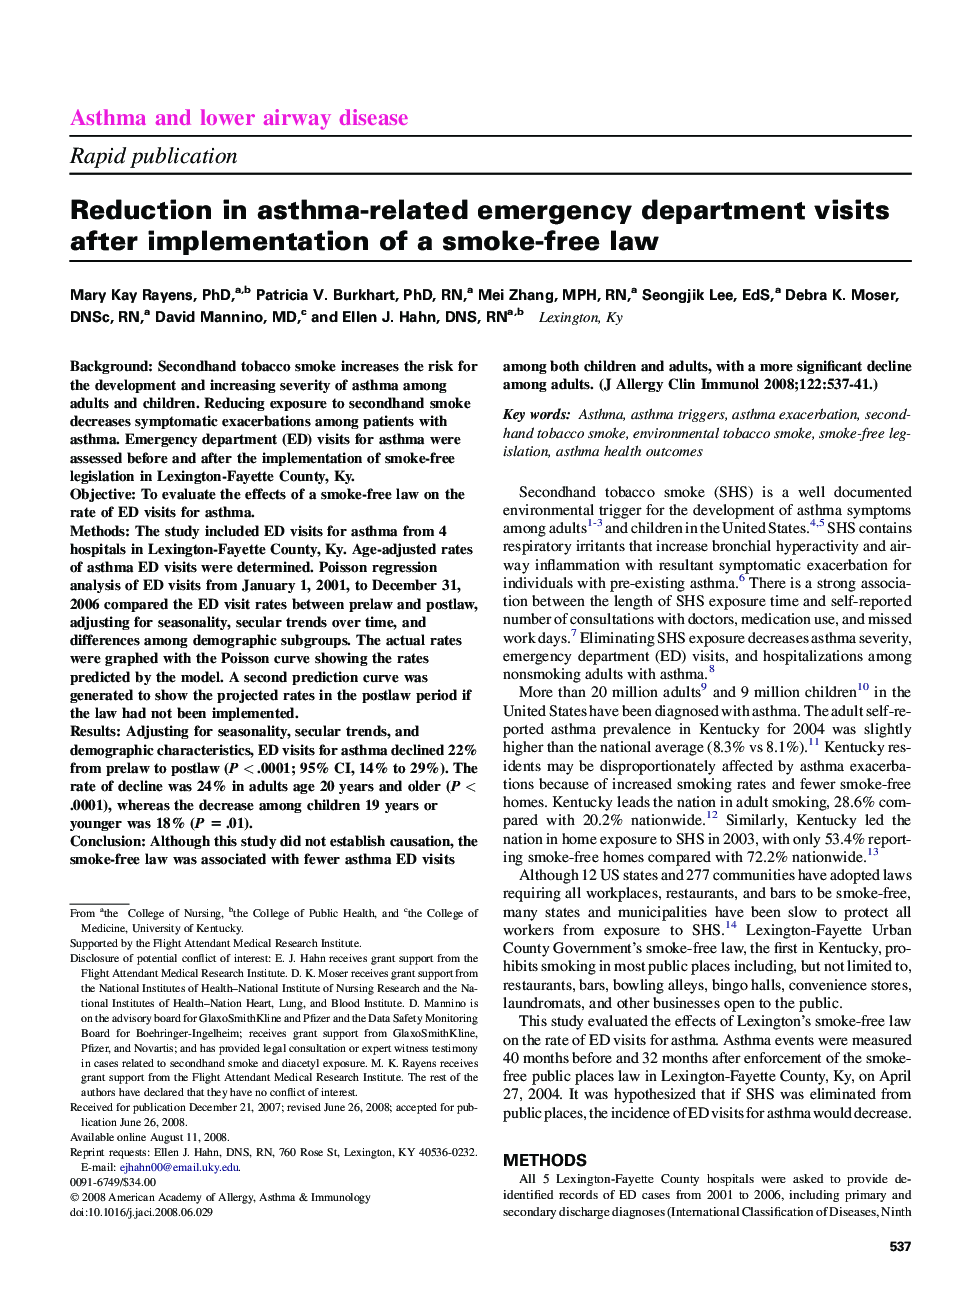 Reduction in asthma-related emergency department visits after implementation of a smoke-free law